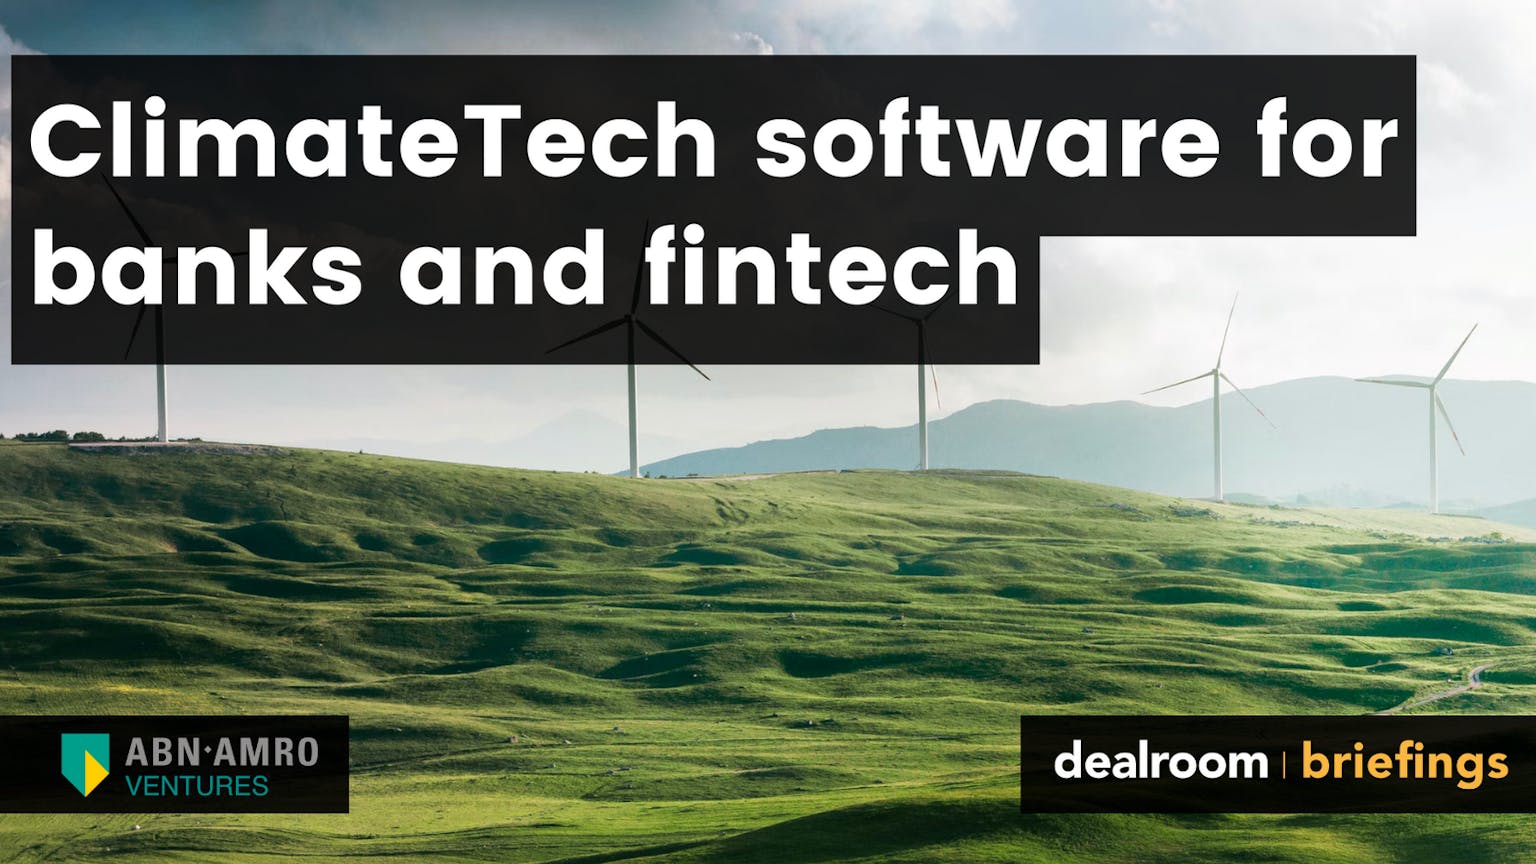 ClimateTech software for banks and fintechs